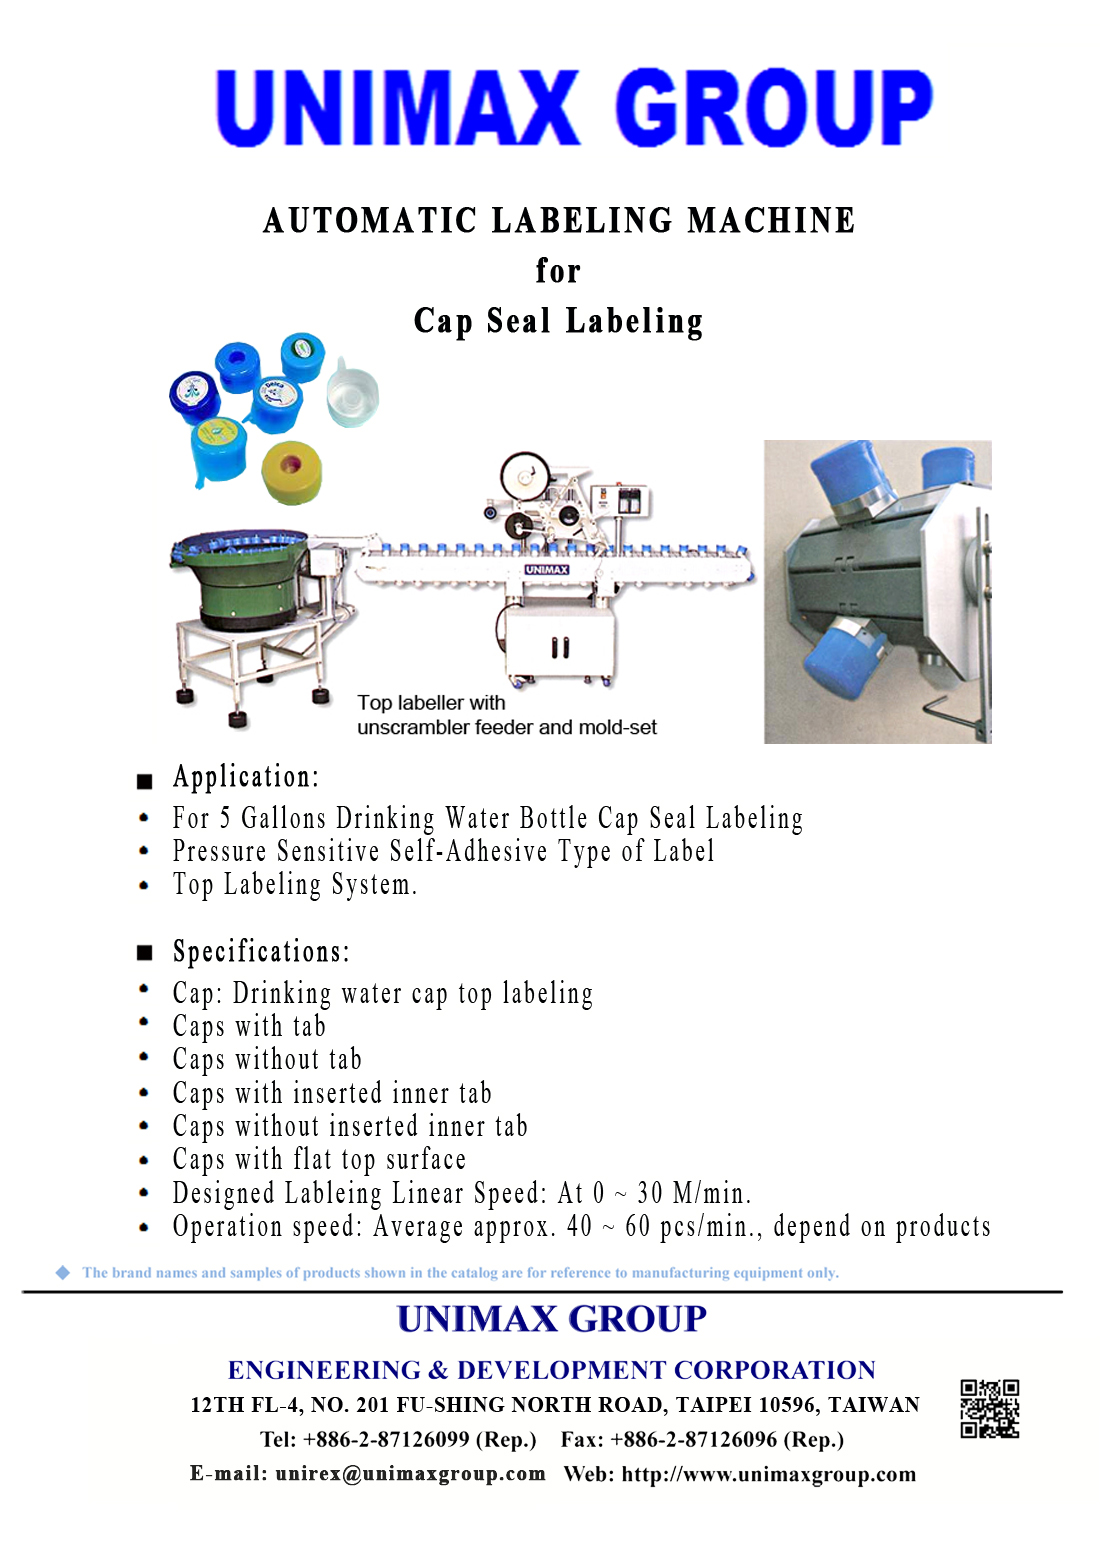 Automatic Top Labeling Machine for Cap Seal Labeling